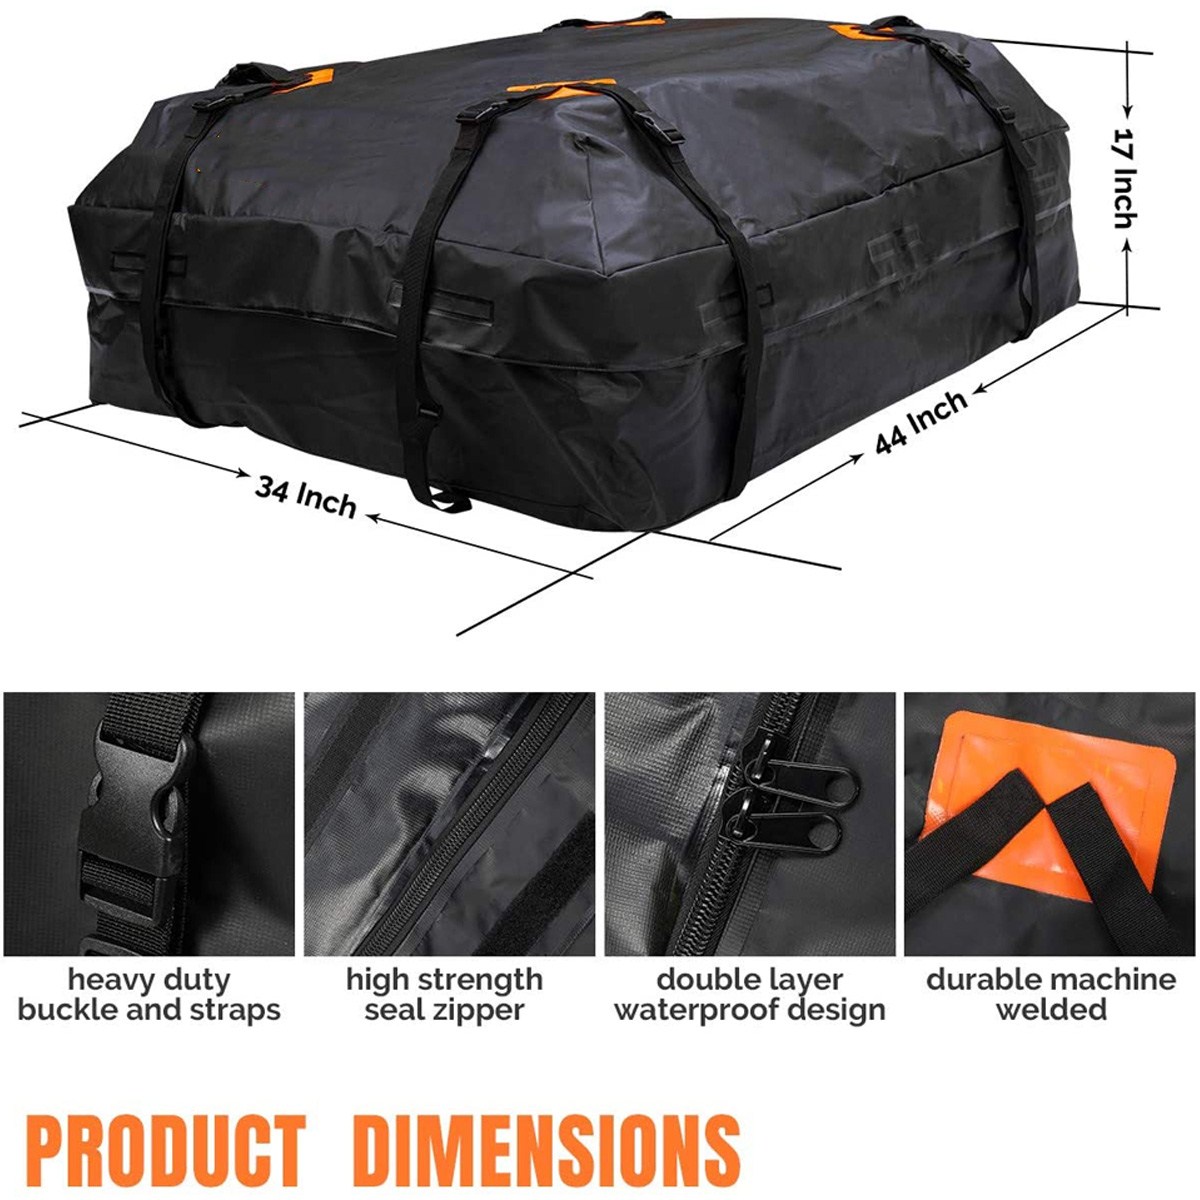 475L-Car-Rooftop-Cargo-Bag-420D-Waterproof-Car-Top-Carrier-Bag-Luggage-Storage-for-Outdoor-Travel-Ca-1888699-2